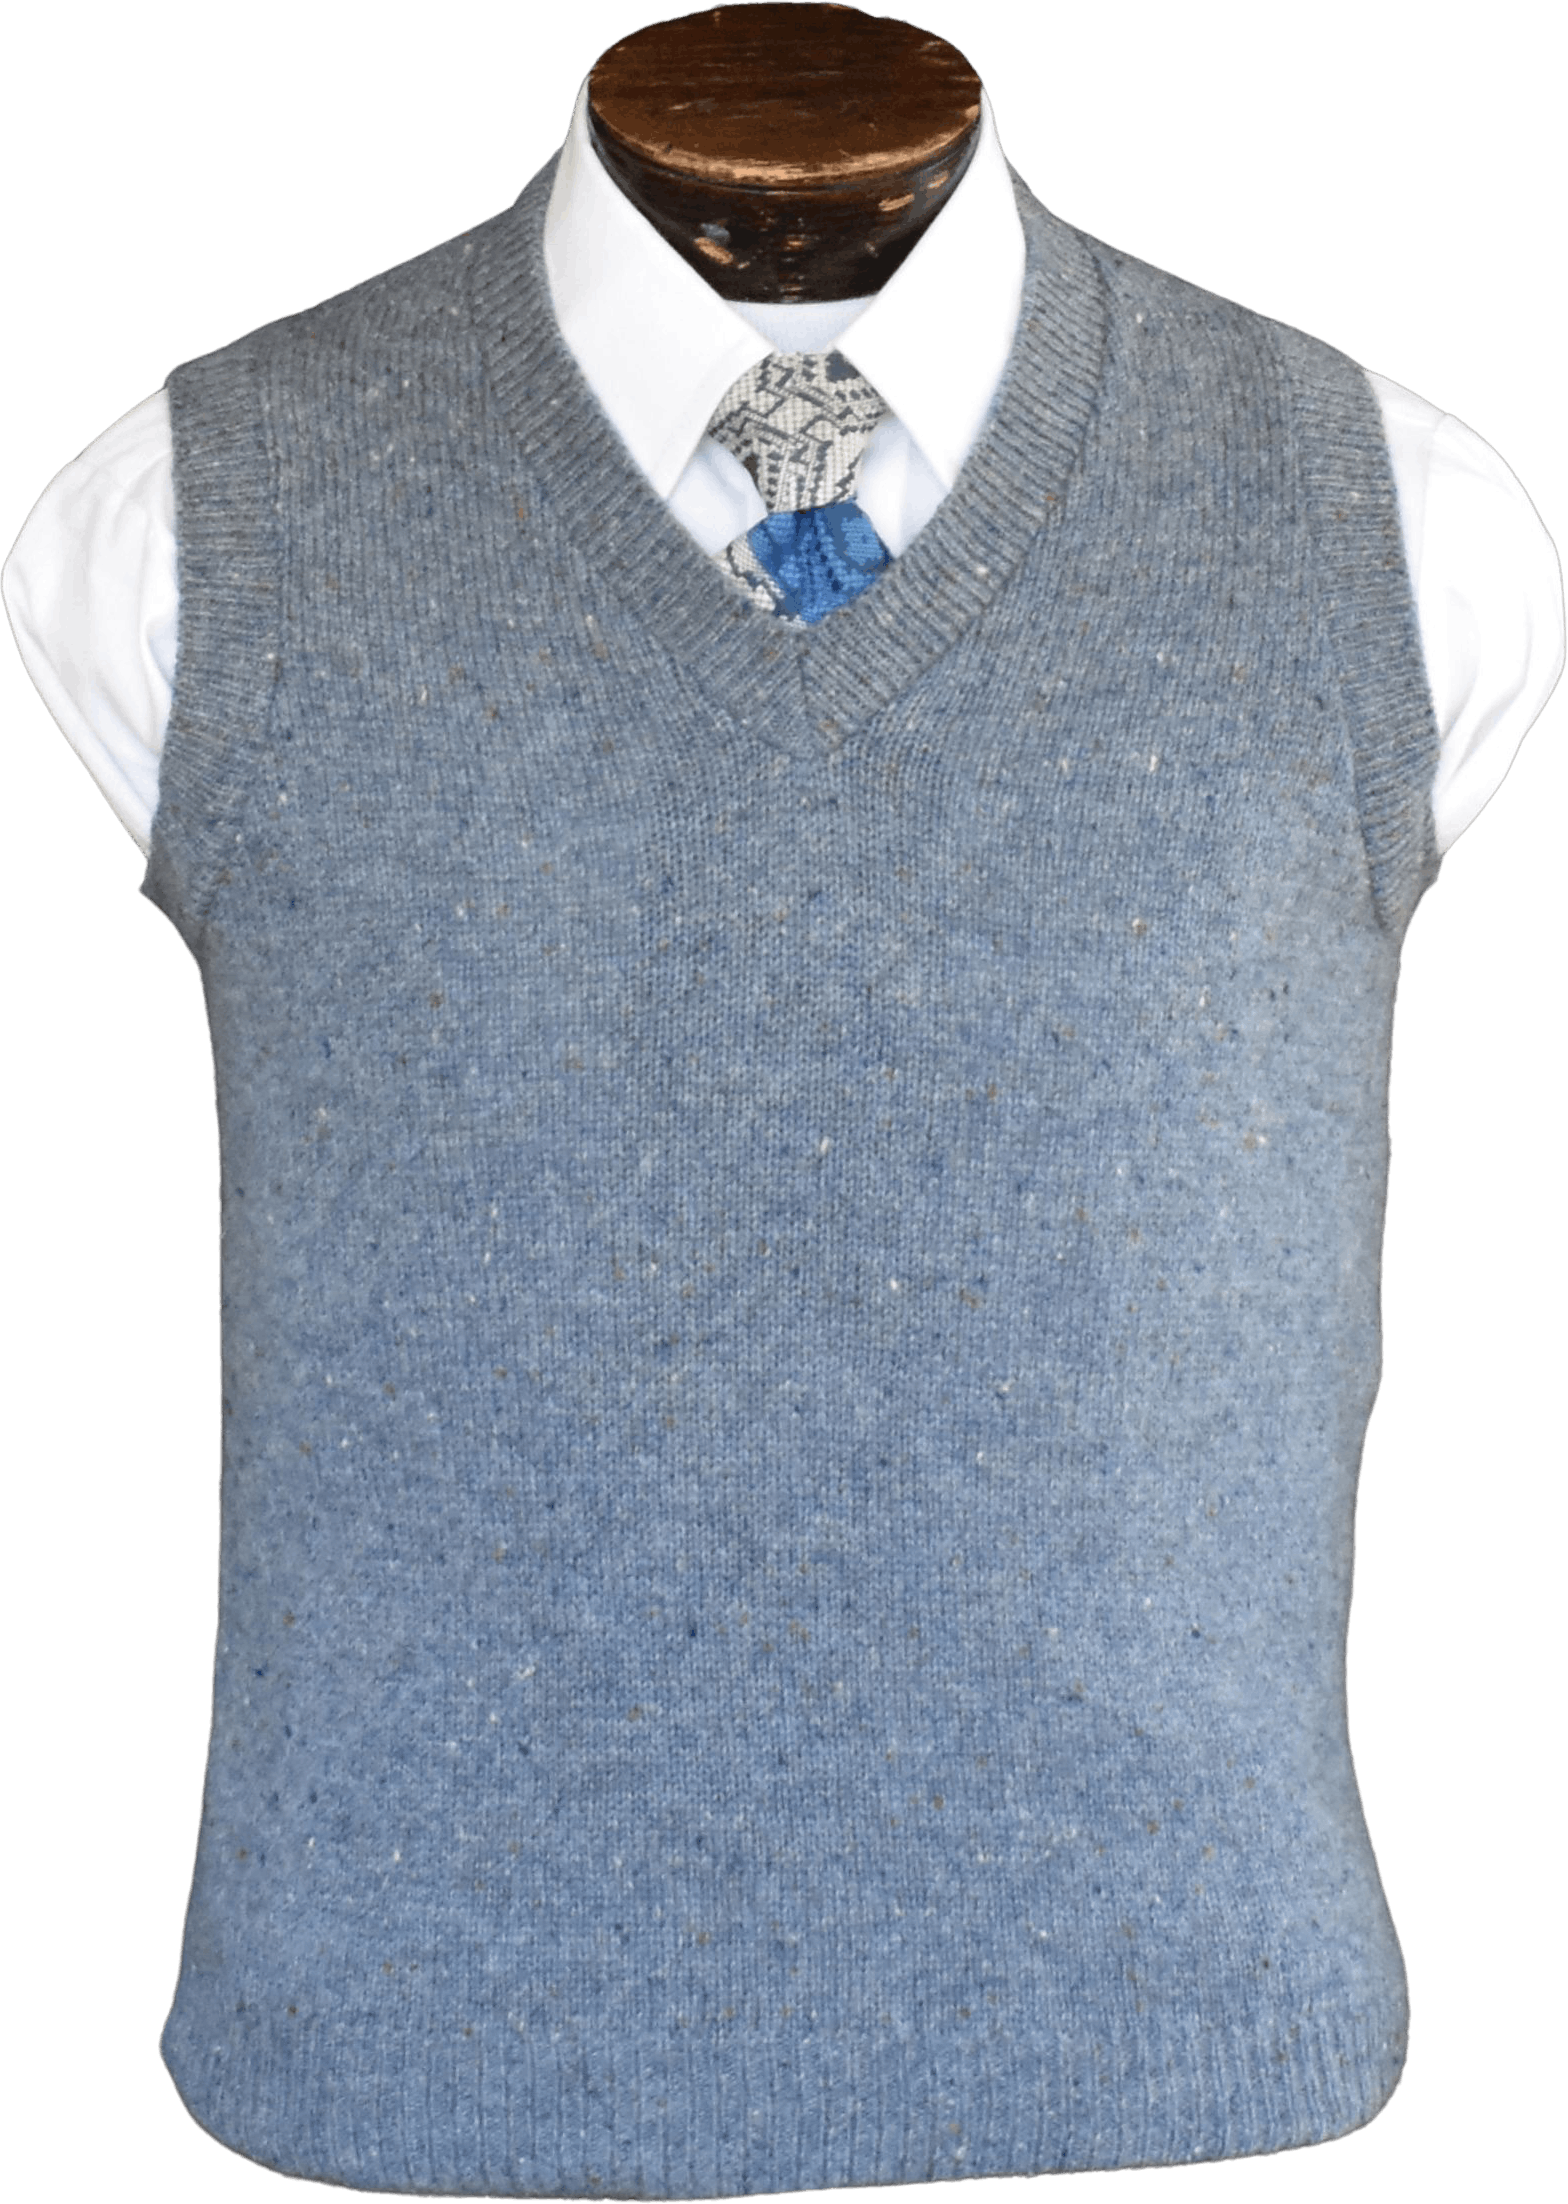 Vintage 70's Heather Blue Sweater Vest by Jcpenney | Shop THRILLING